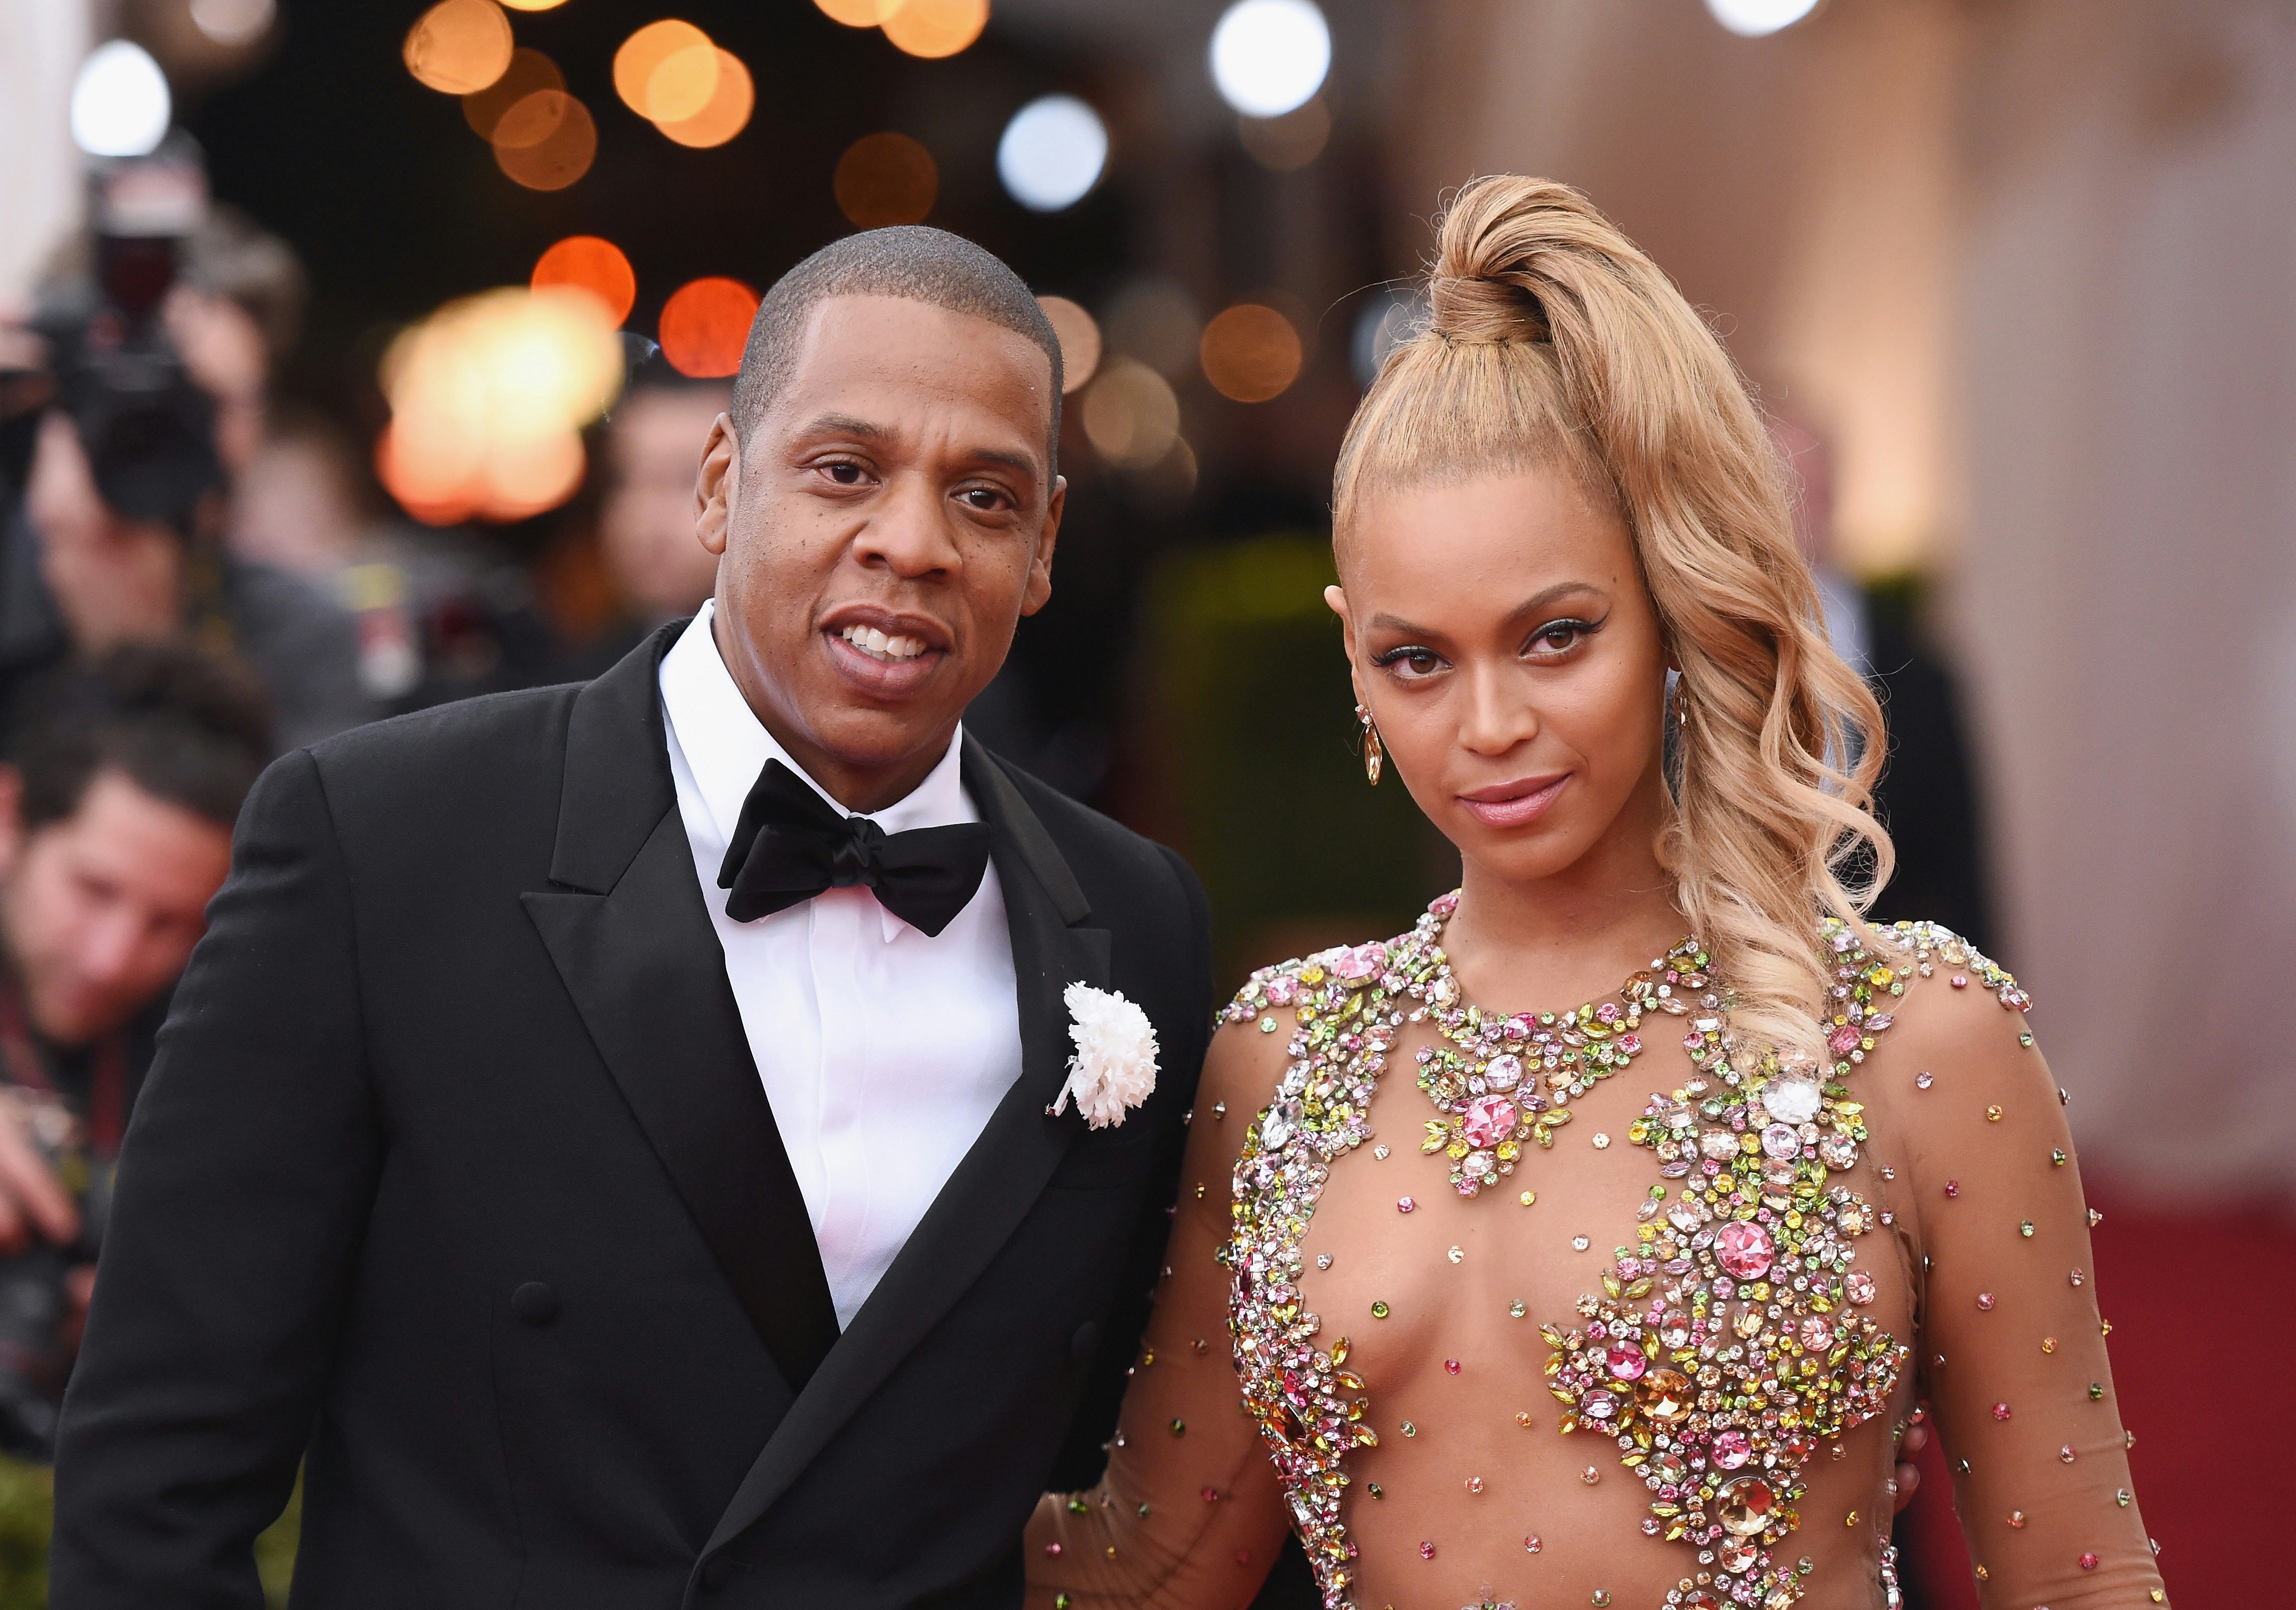 Forbes Names Beyoncé and Jay Z a Billion-Dollar Couple according to Their  Combined Net Worth